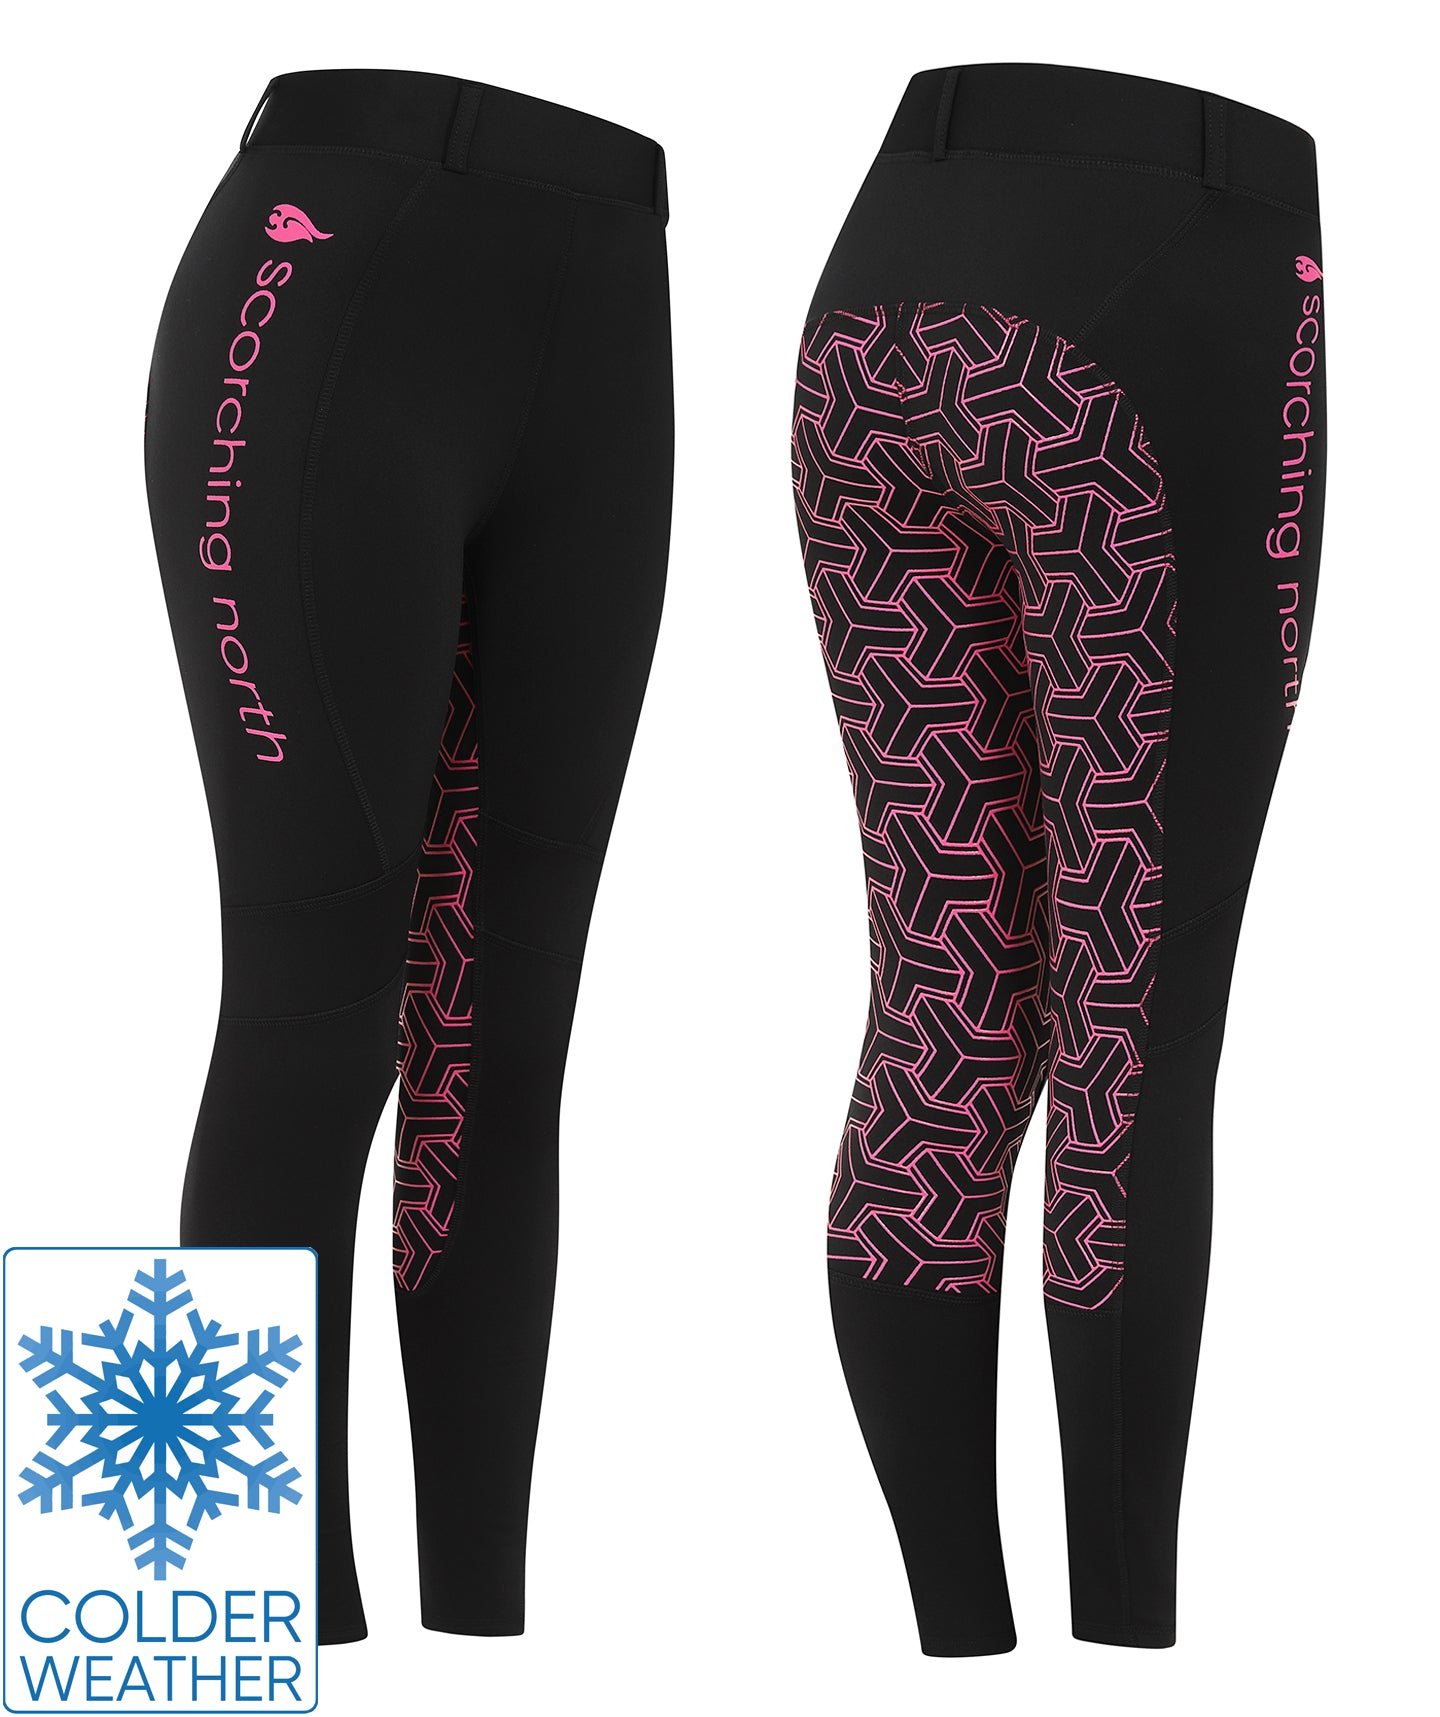 Consider Jockey® Thermal Leggings your winter shield because quality,  comfort and warmth are non negotiable. Shop now at…